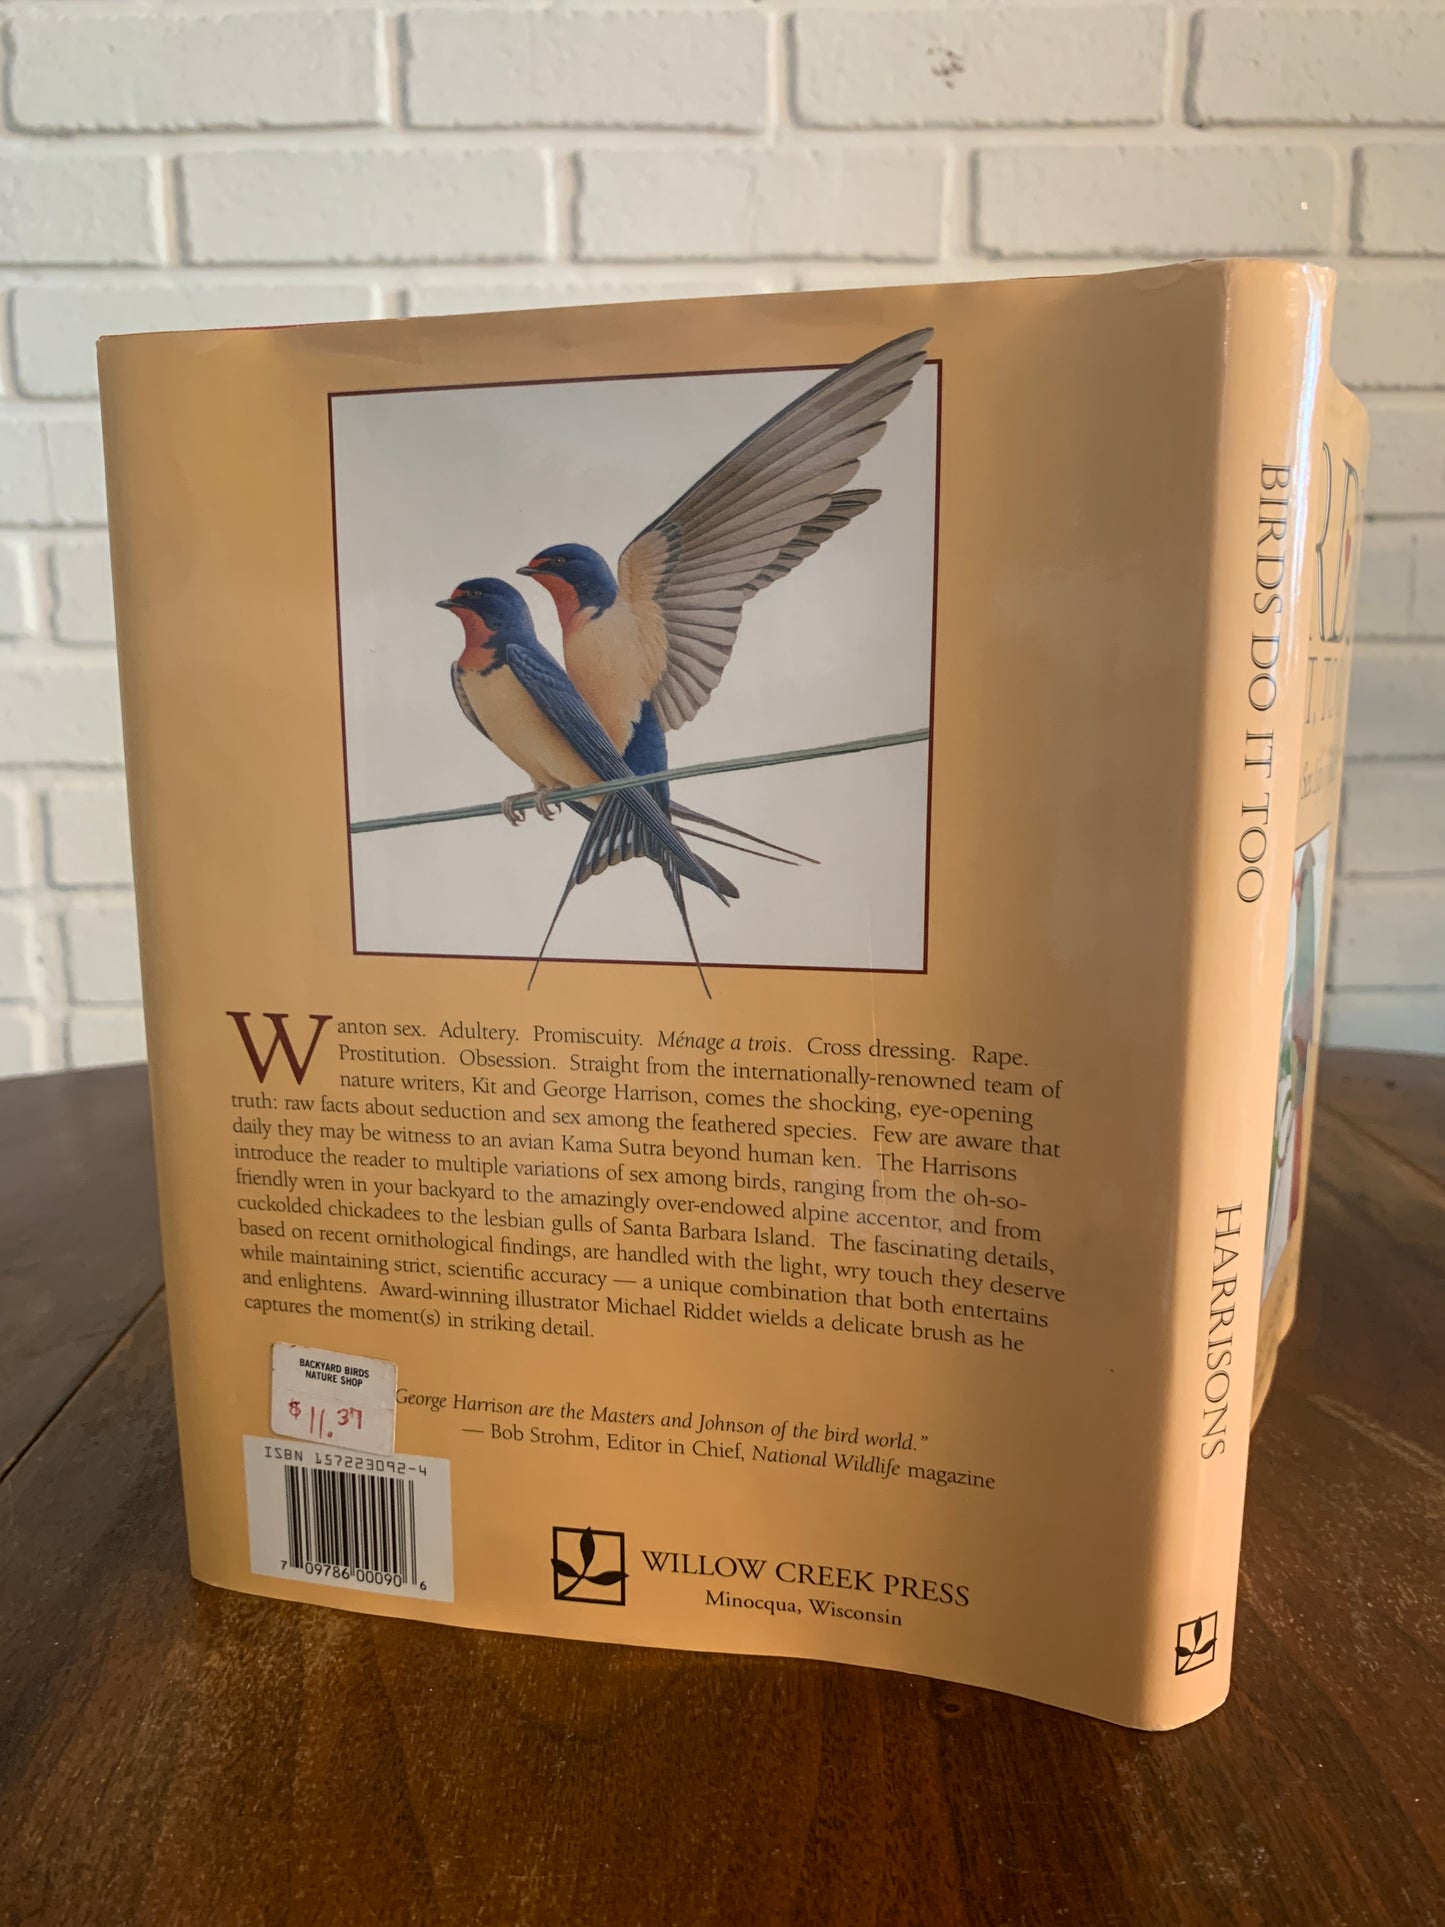 Birds Do It, Too: The Amazing Sex Life of Birds by Kit and George Harrison